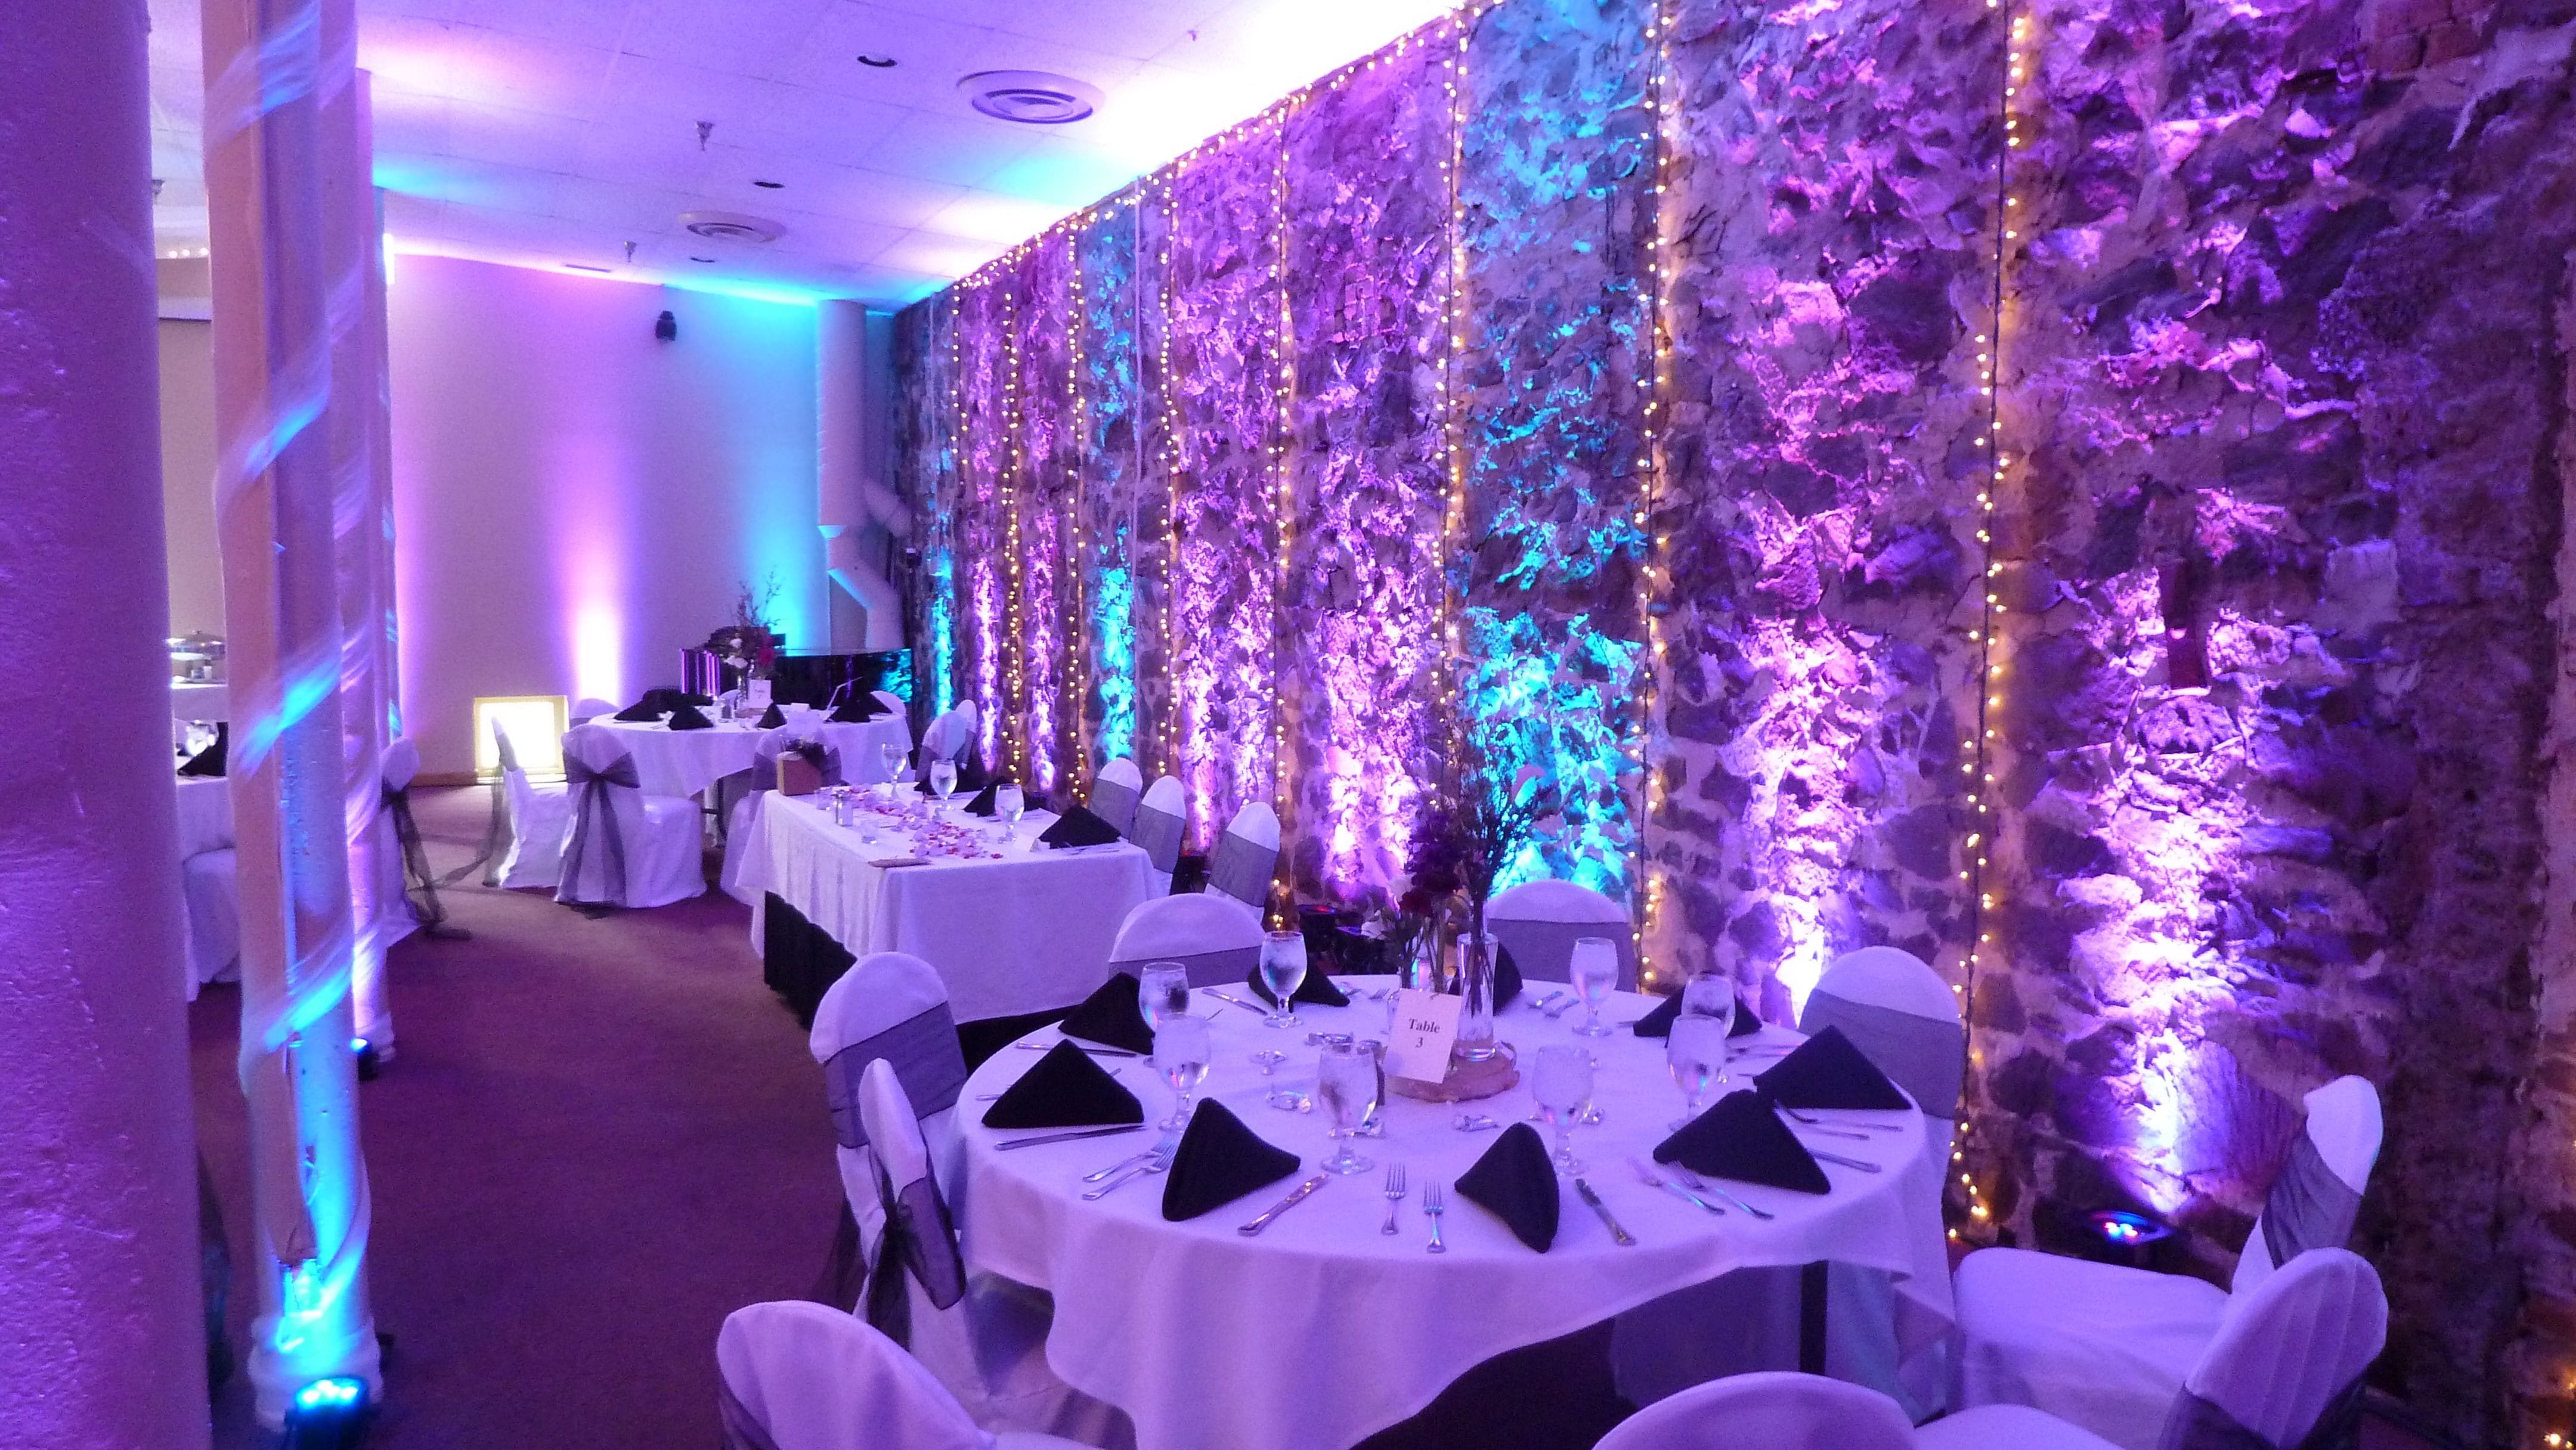 August Fitger room.
Wedding lighting in purple and teal.